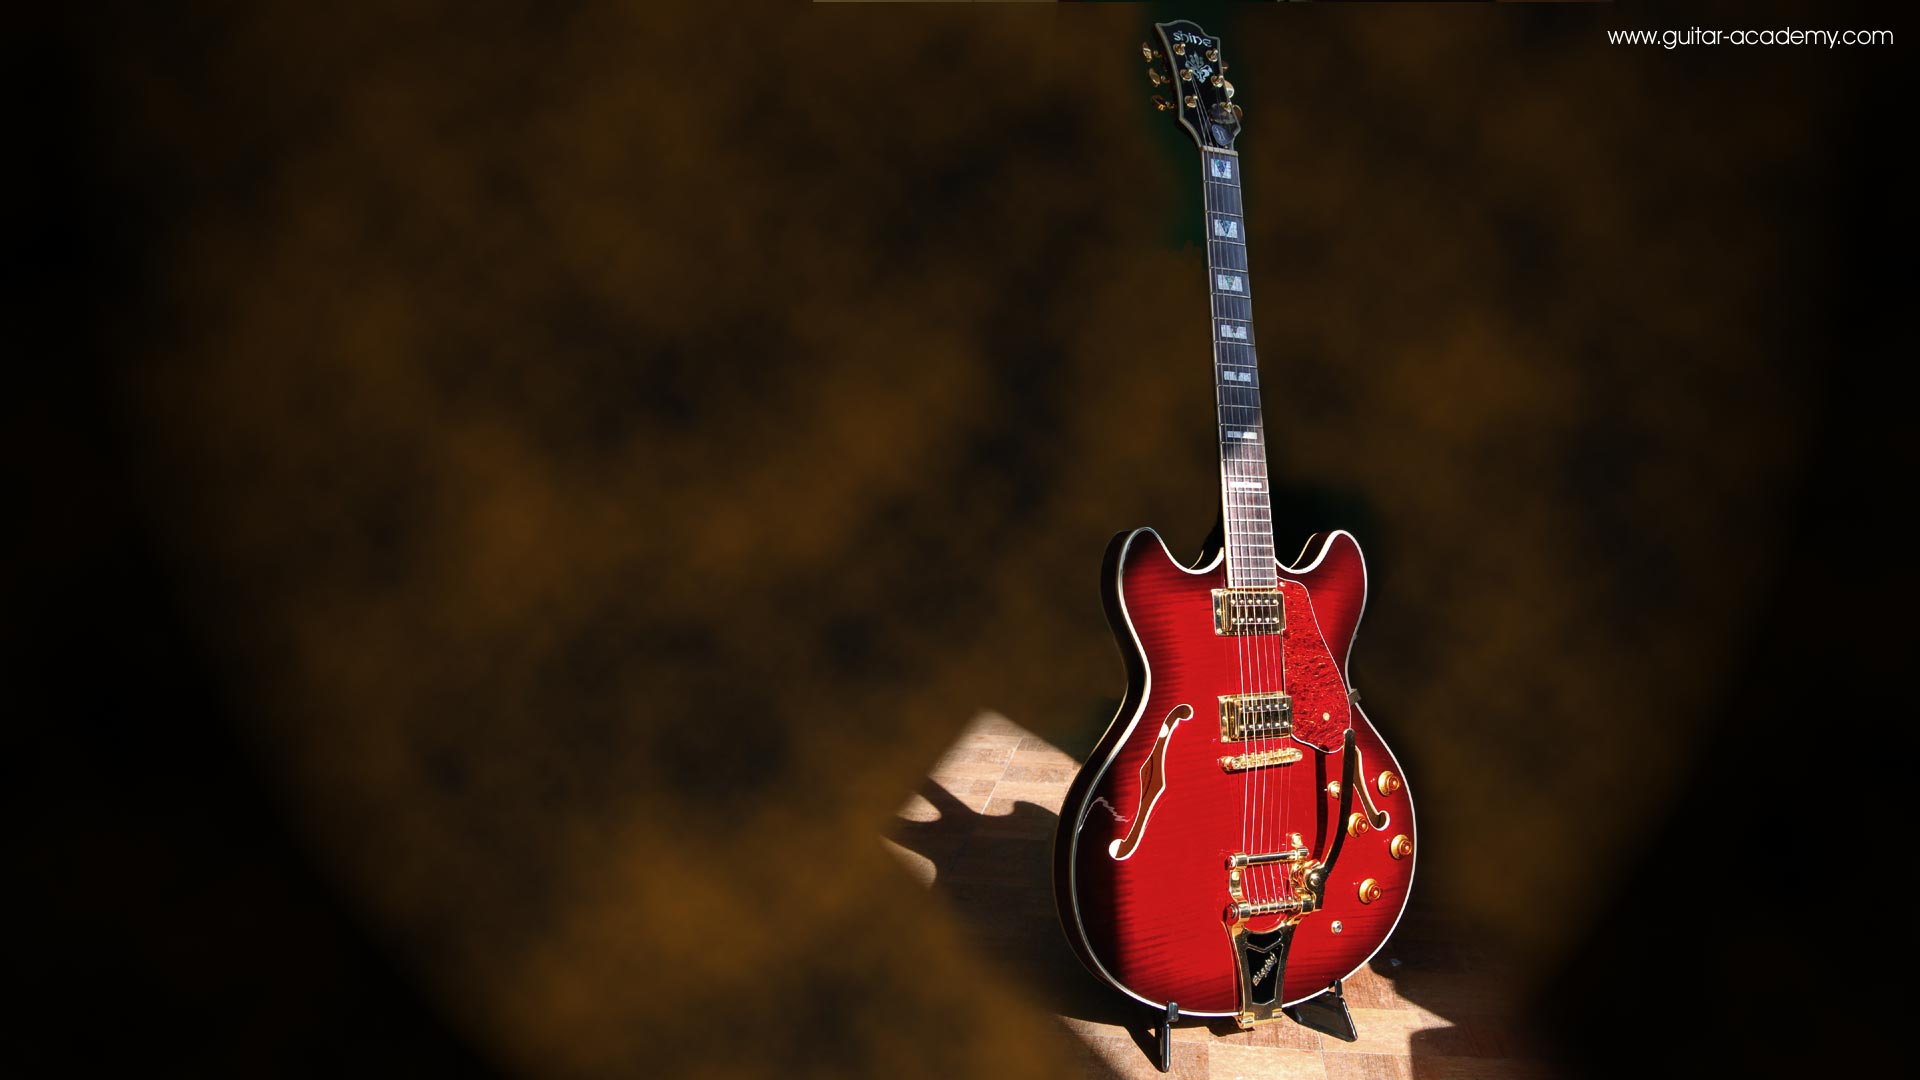 Guitar wallpapers, from GCH Guitar Academy